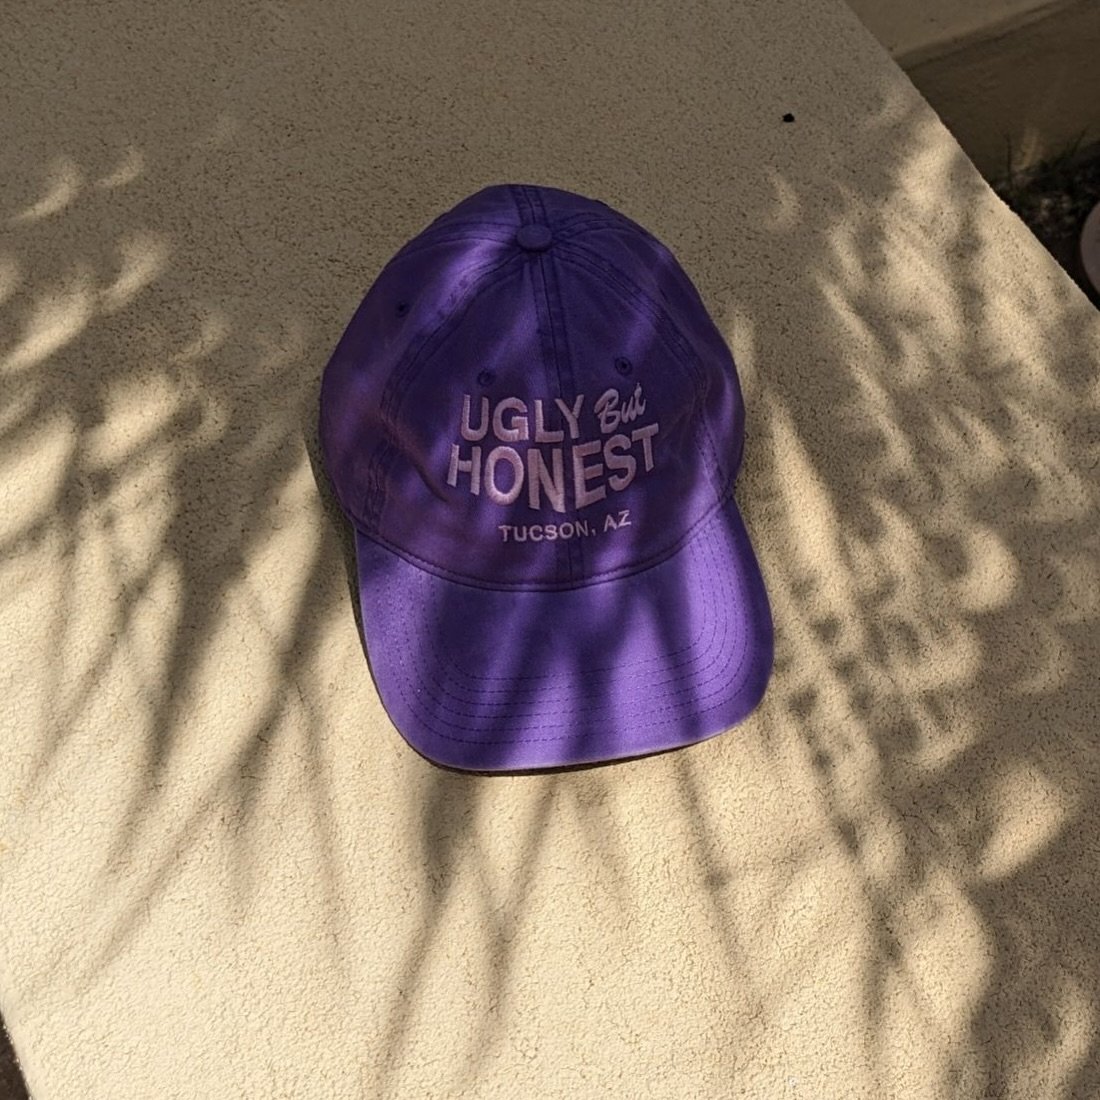 Purple Ugly But Honest hats available on the site! 💜

Check out the Ugly but Honest collection as well as our other collections or those of our pals! 🤞🏽🫶🏼

Shop@creamforever.com

#creamforever #tucsonaz